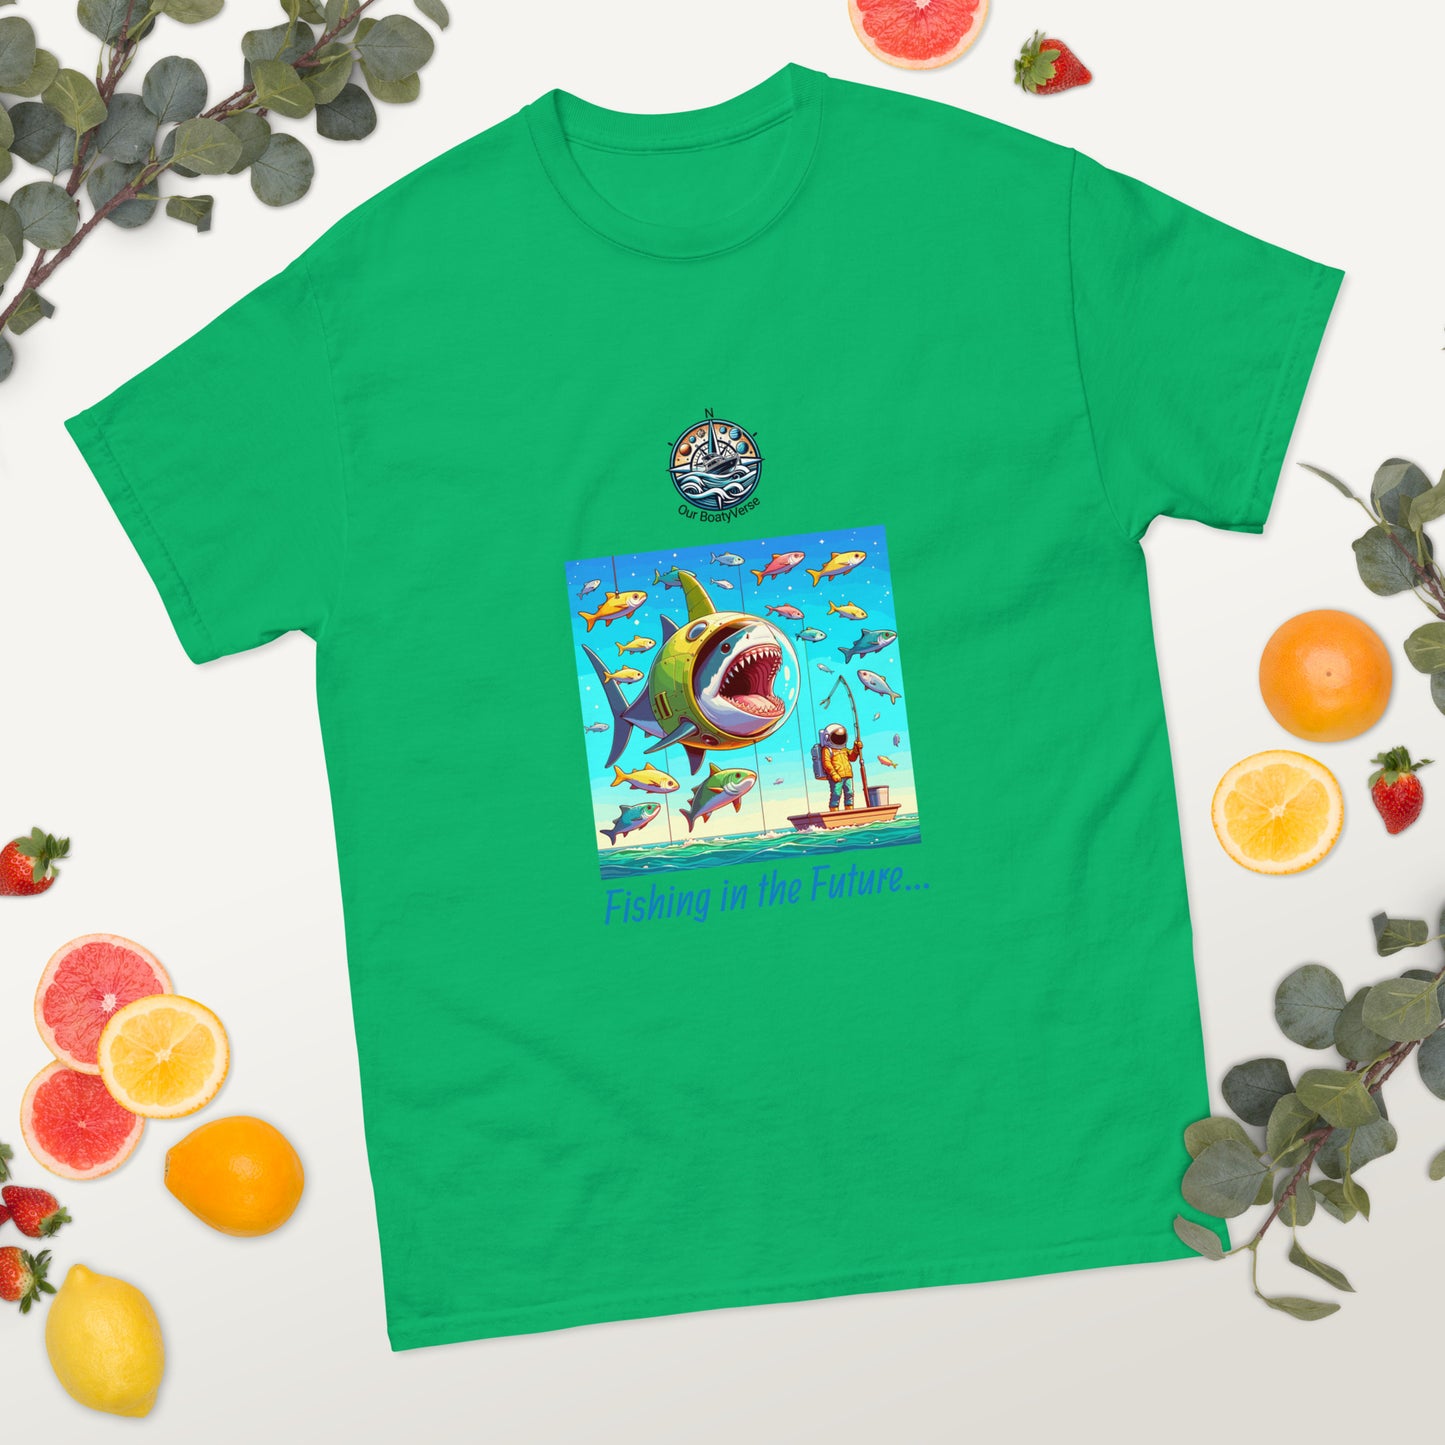 Novelty Fishing in the Future Men's T-Shirt by Our BoatyVerse